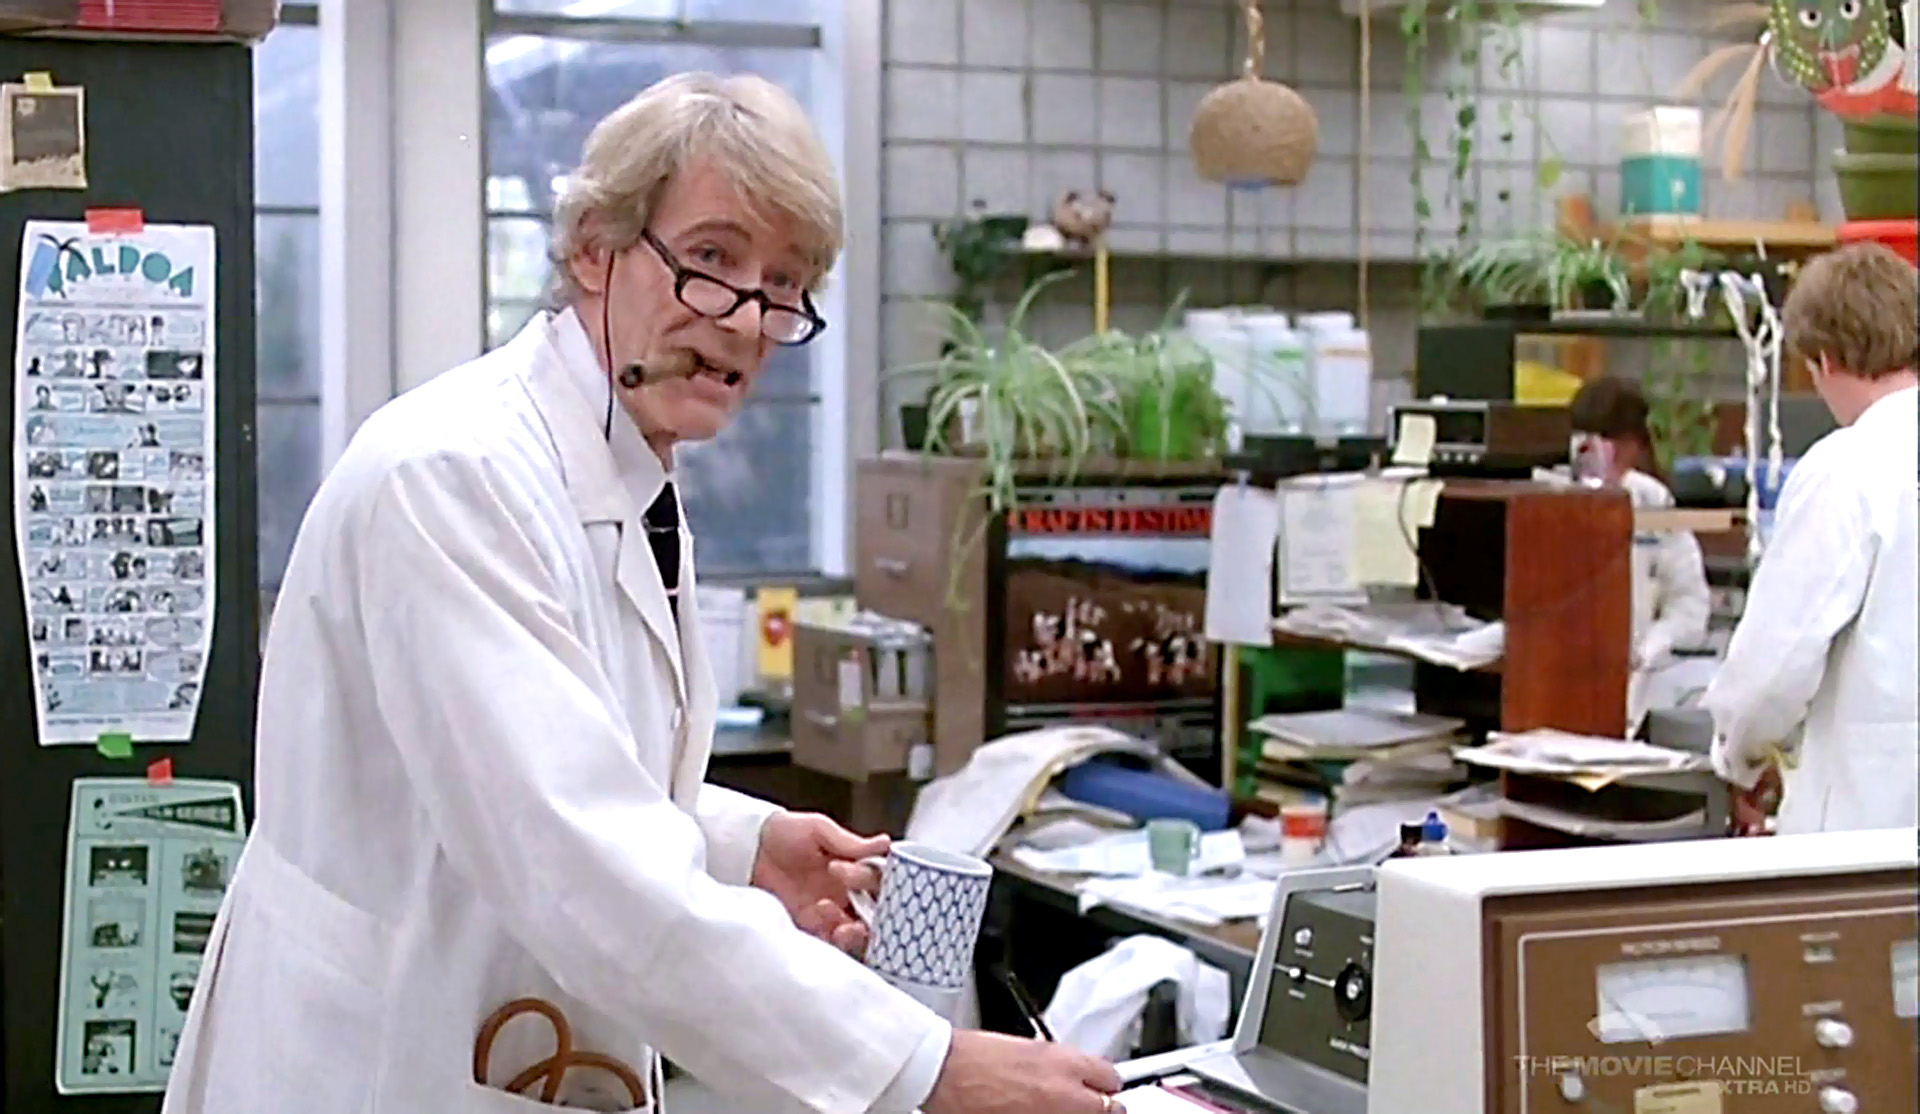 Dr. Creator - Specialista in miracoli (1985) con Peter O'Toole